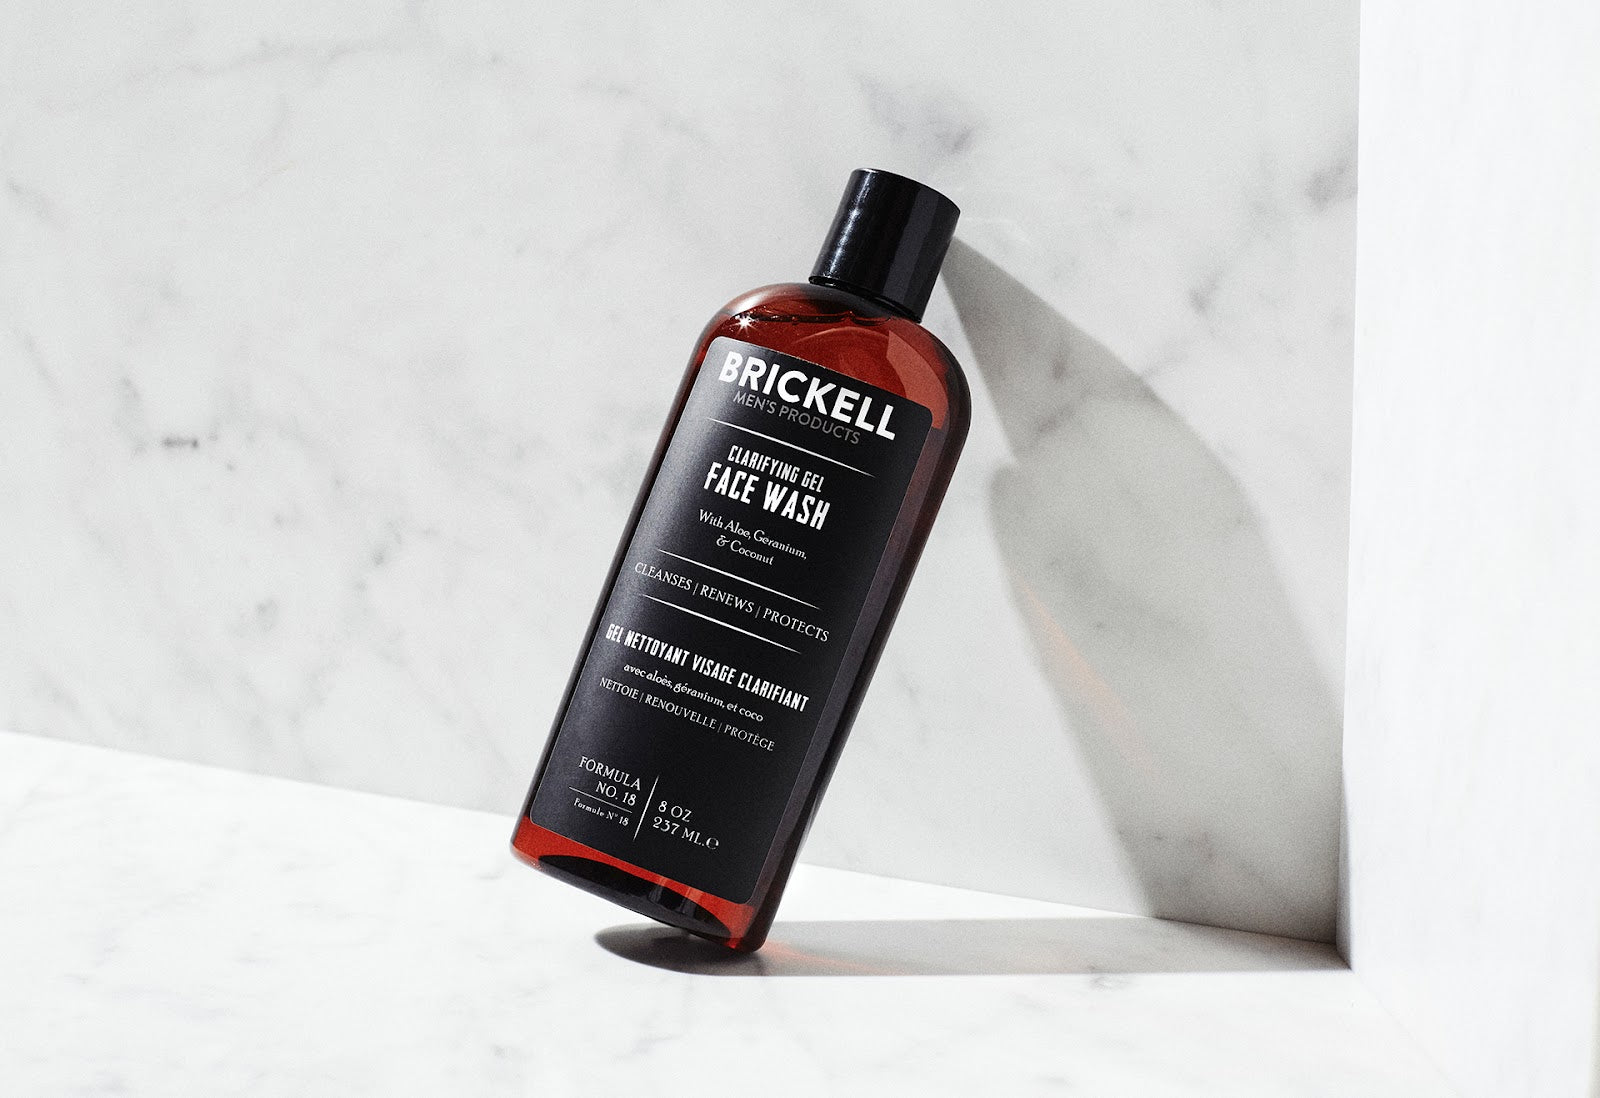 Best Natural Face Wash For Men with Oily Skin  Brickell Men's Products –  Brickell Men's Products® CANADA